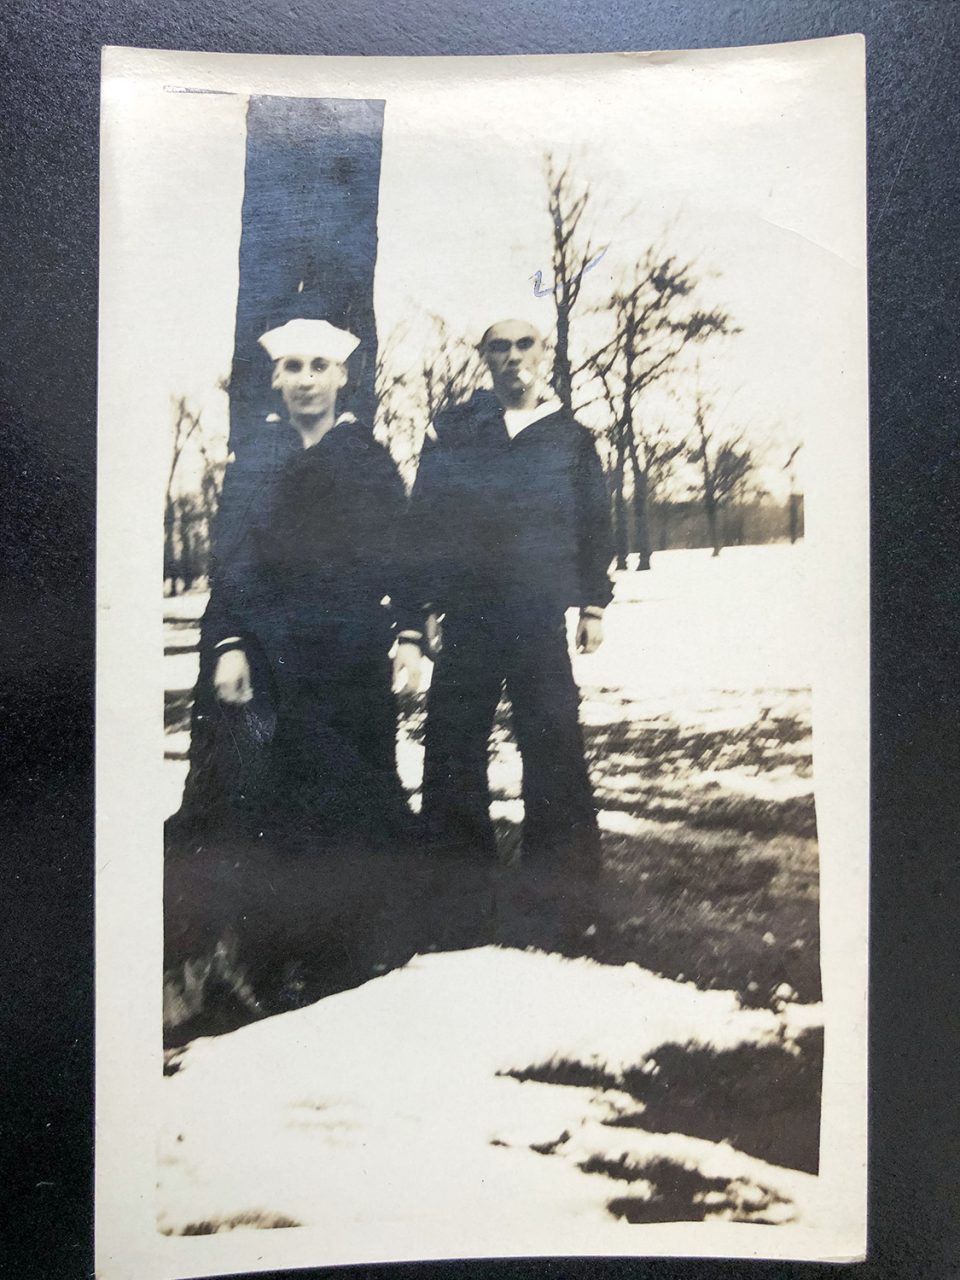 This undated old snapshot shows two young sailors in their uniforms. The snow and sky form a strong contrast with the black trees that their dark clothing blends into.